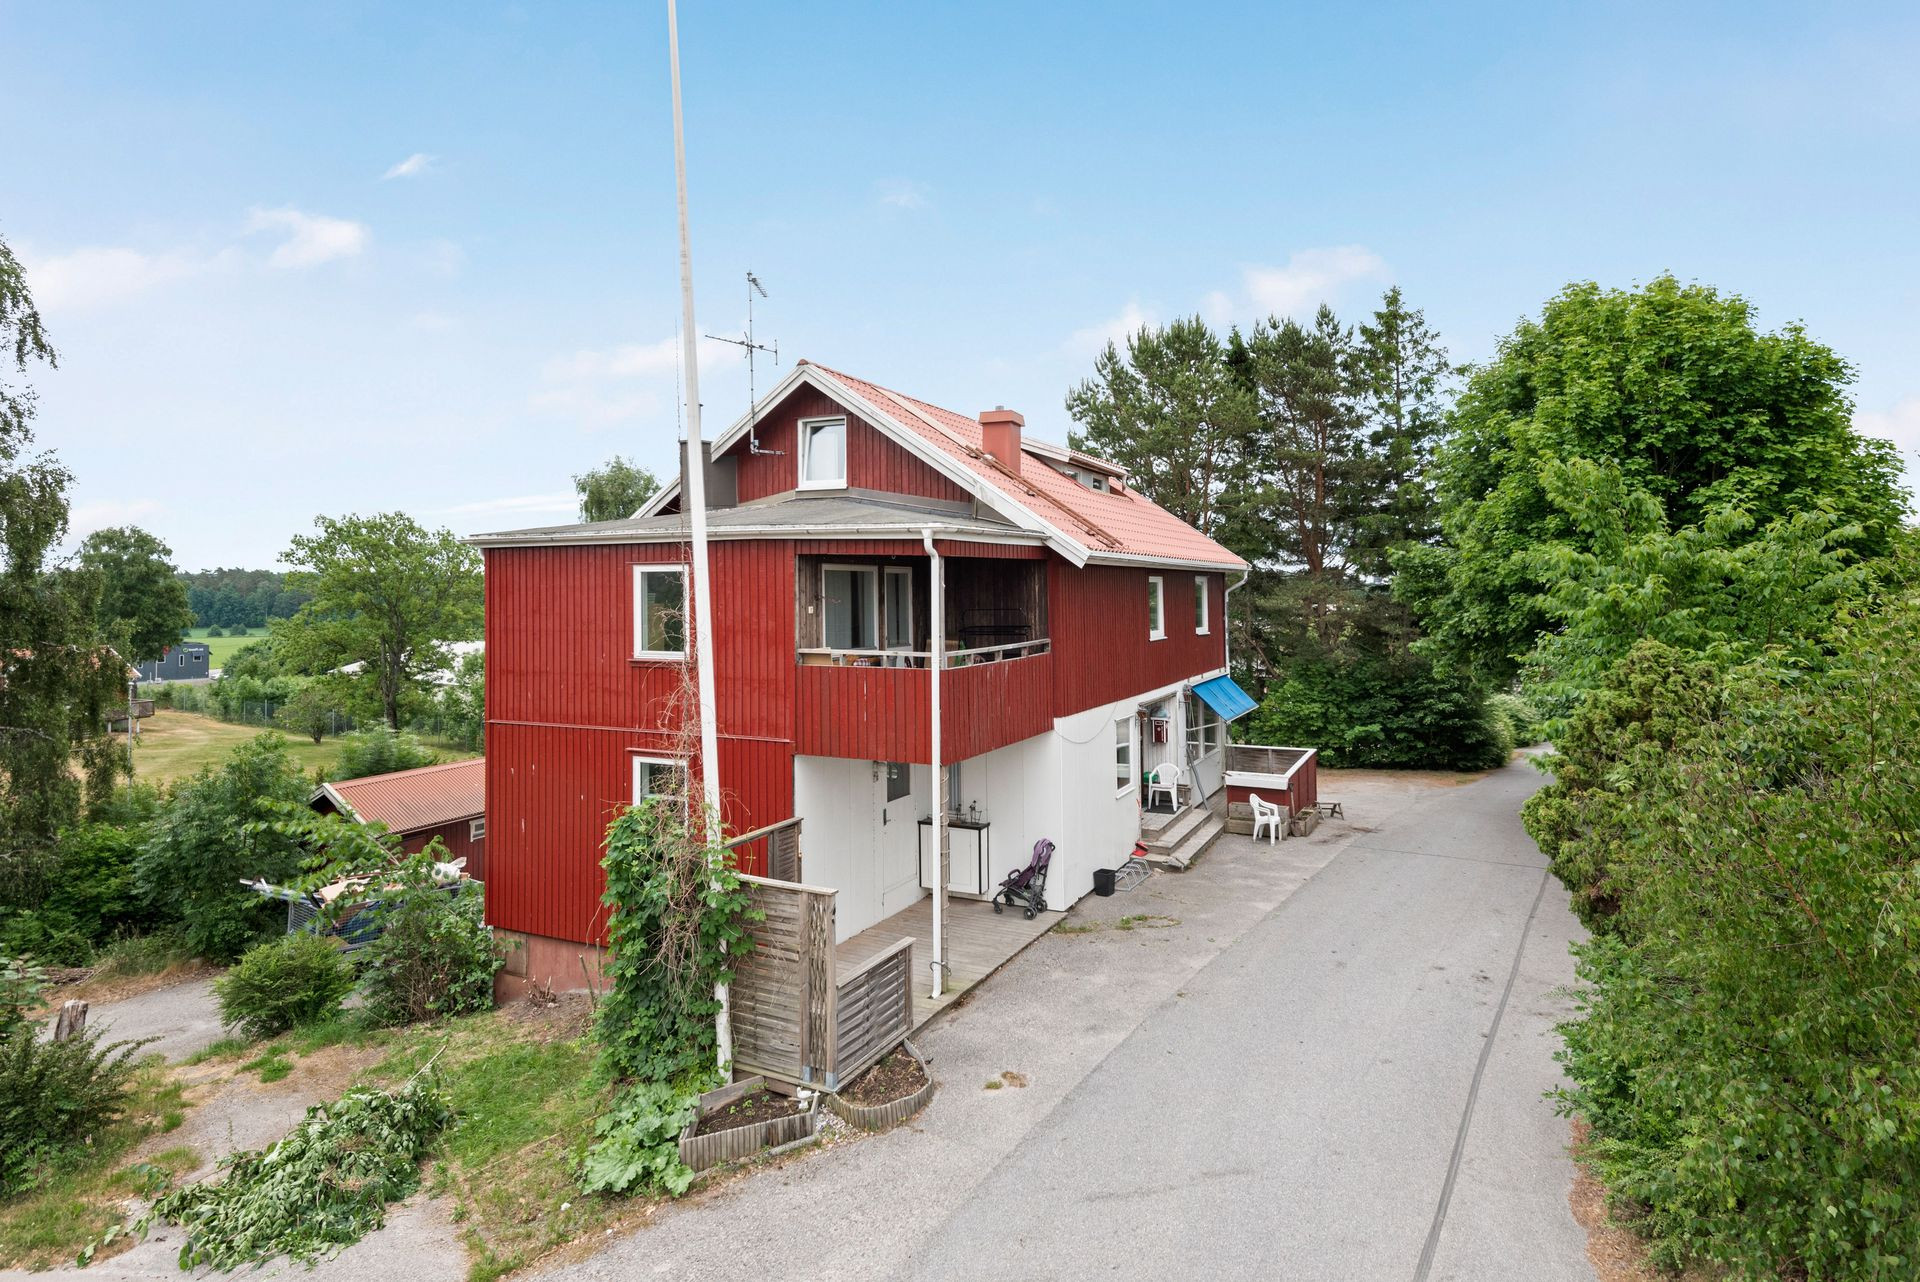 Commercial Property in Sweden for sale